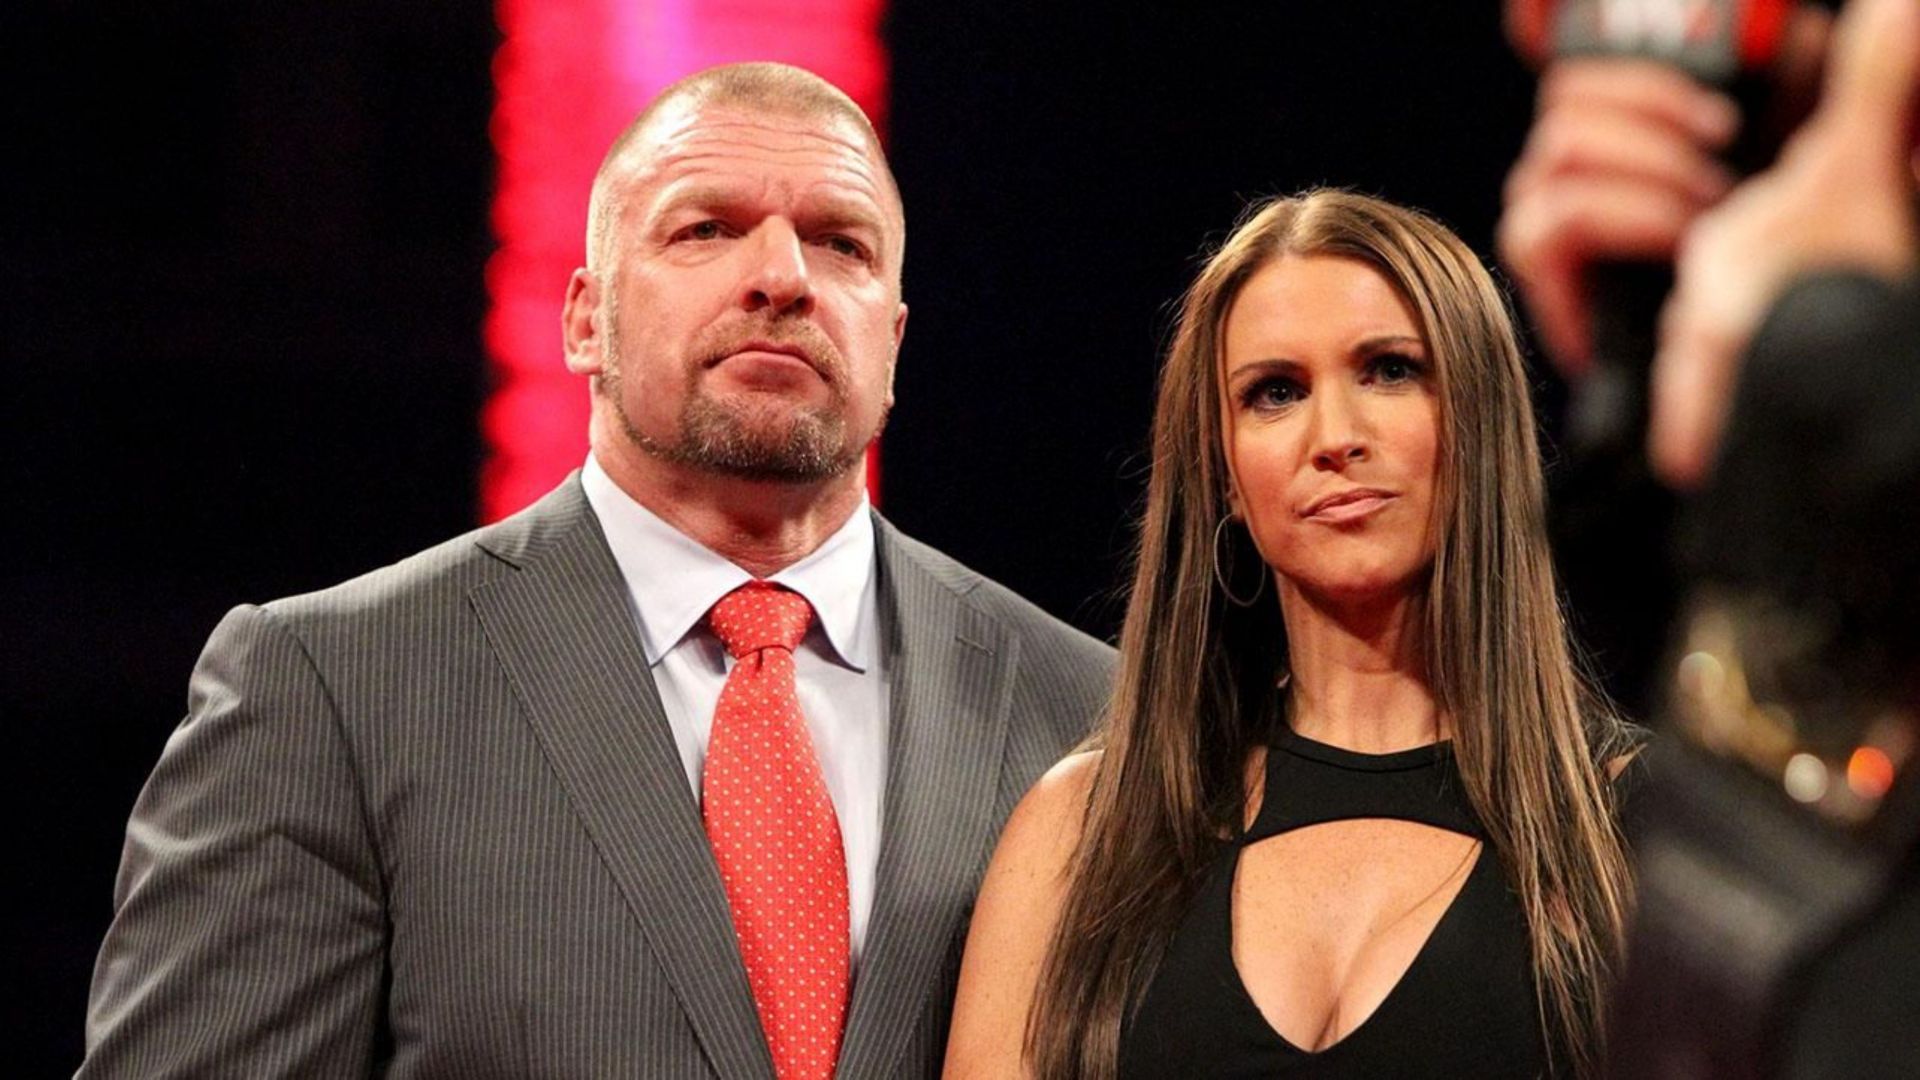 WWE EVP Triple H&#039;s love for his wife, Stephanie McMahon, is very strong